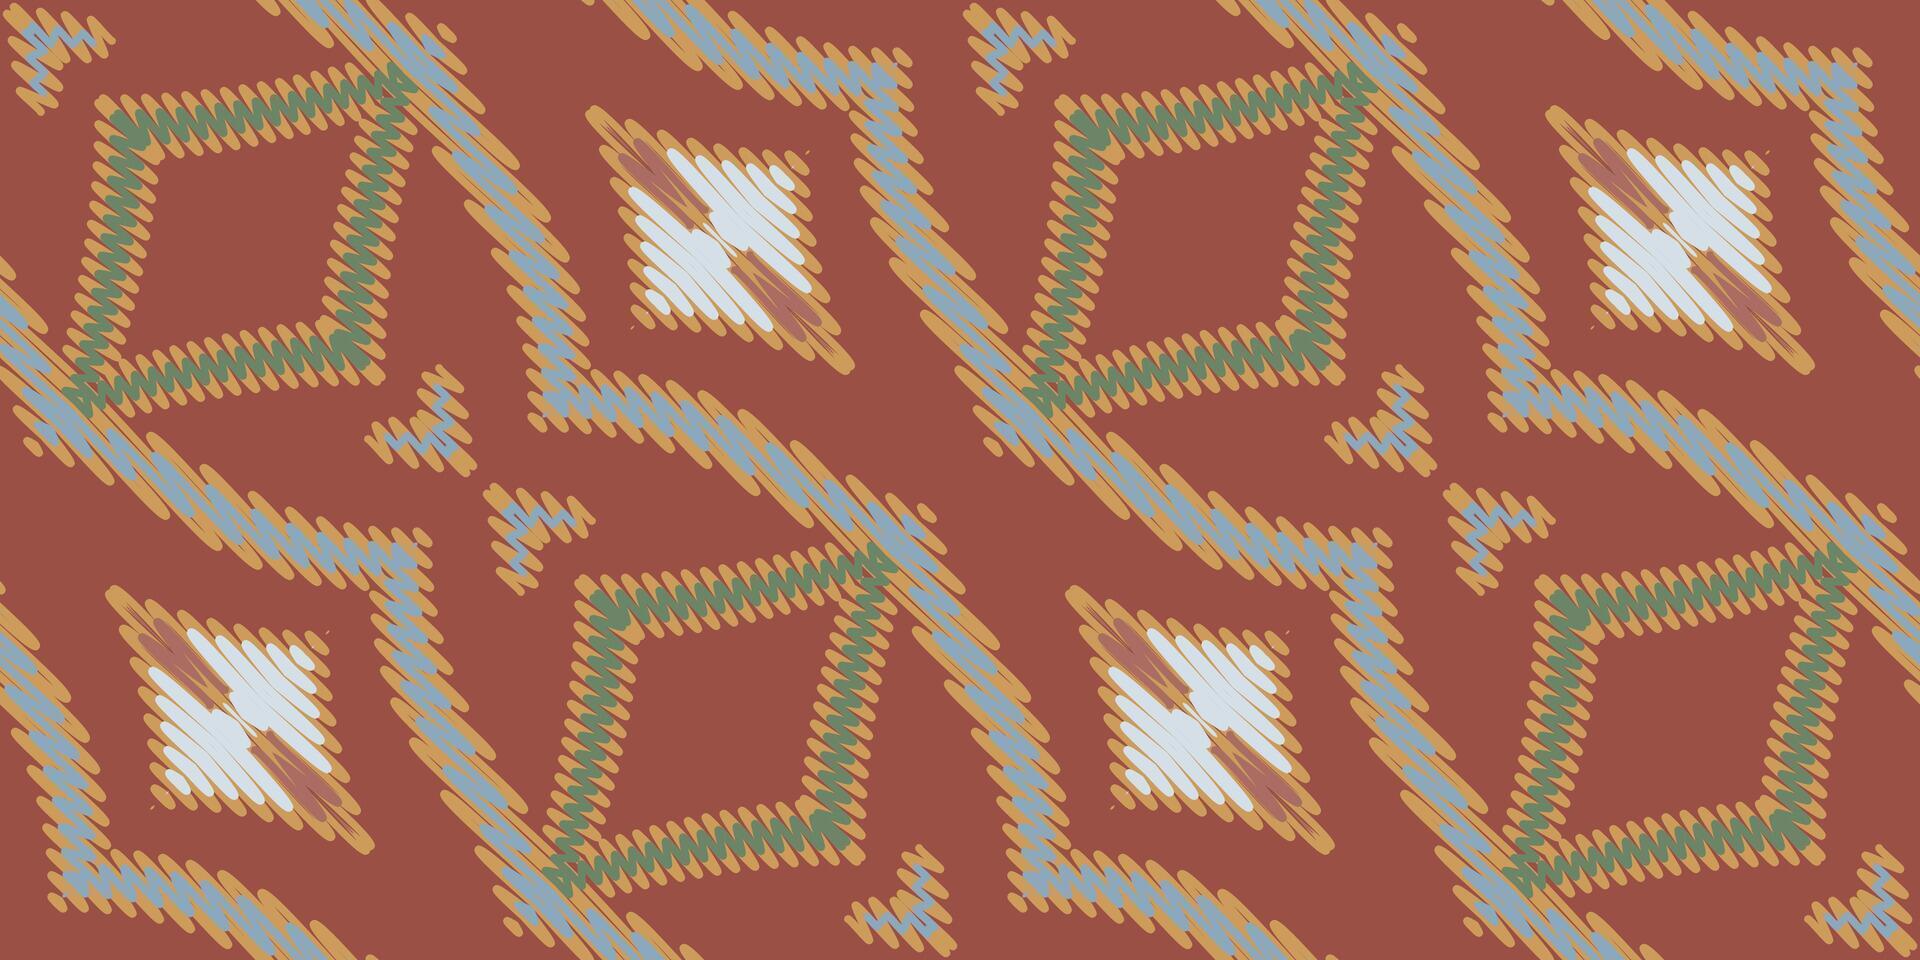 Baroque pattern Seamless Mughal architecture Motif embroidery, Ikat embroidery vector Design for Print jacquard slavic pattern folklore pattern kente arabesque